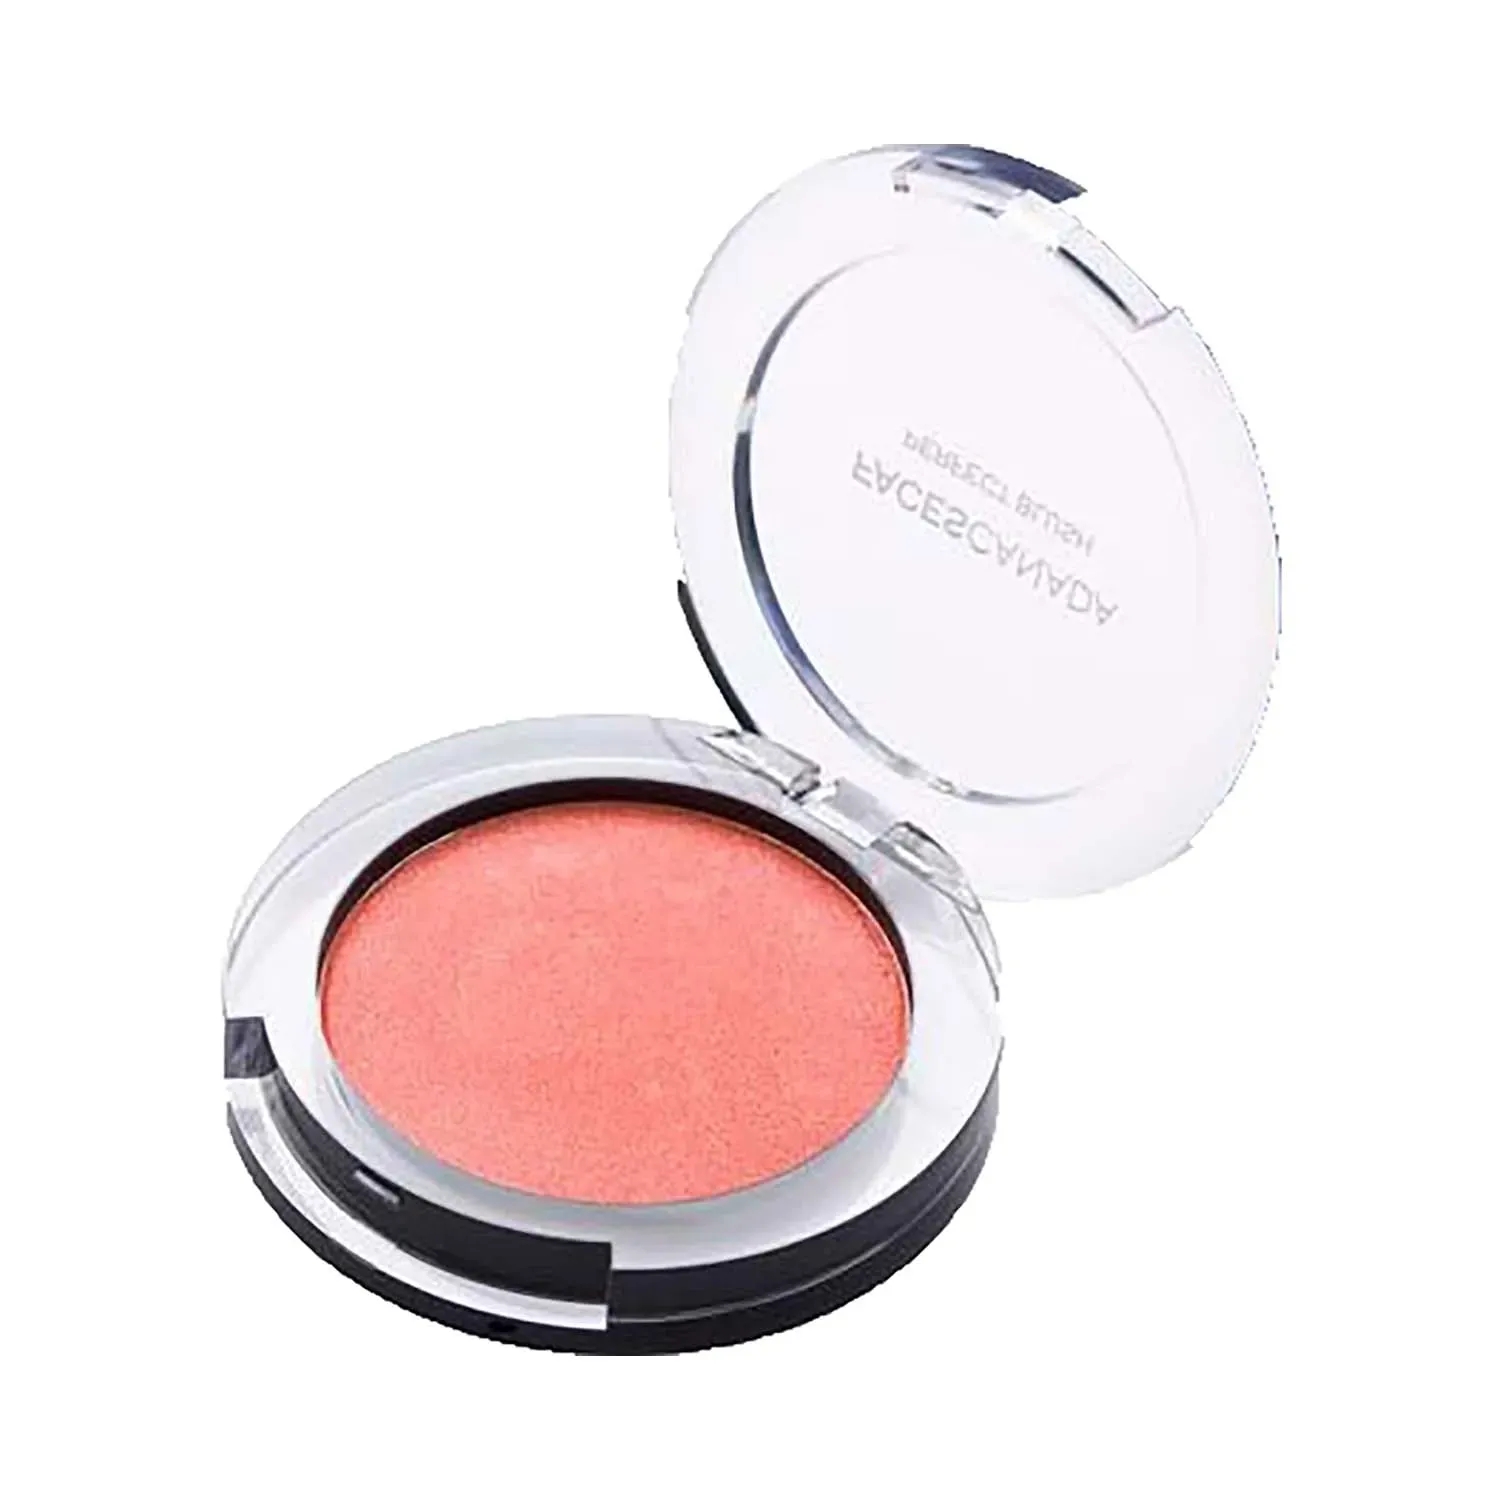 Faces Canada | Faces Canada Perfecting Blush - 06 Apricot (5g)